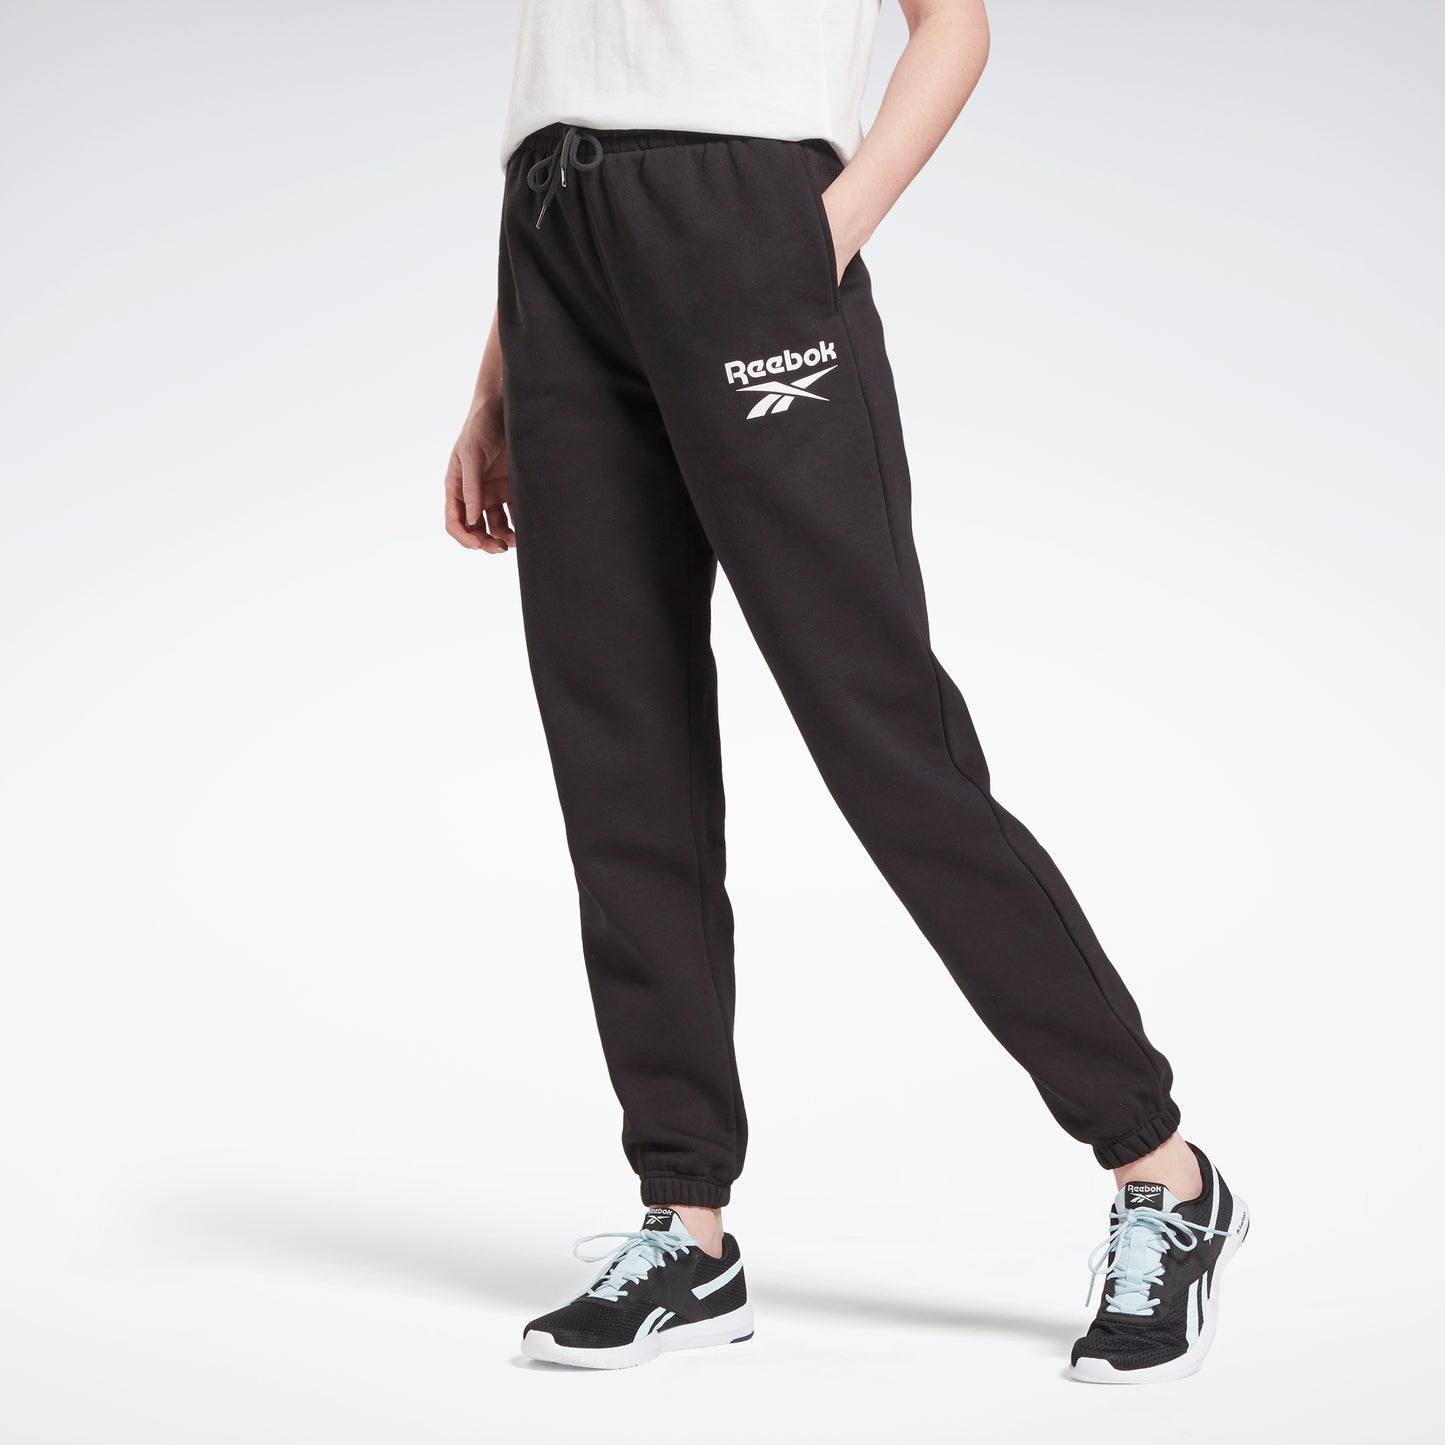 Evolution Joggers - Made from Recycled Coffee Grounds